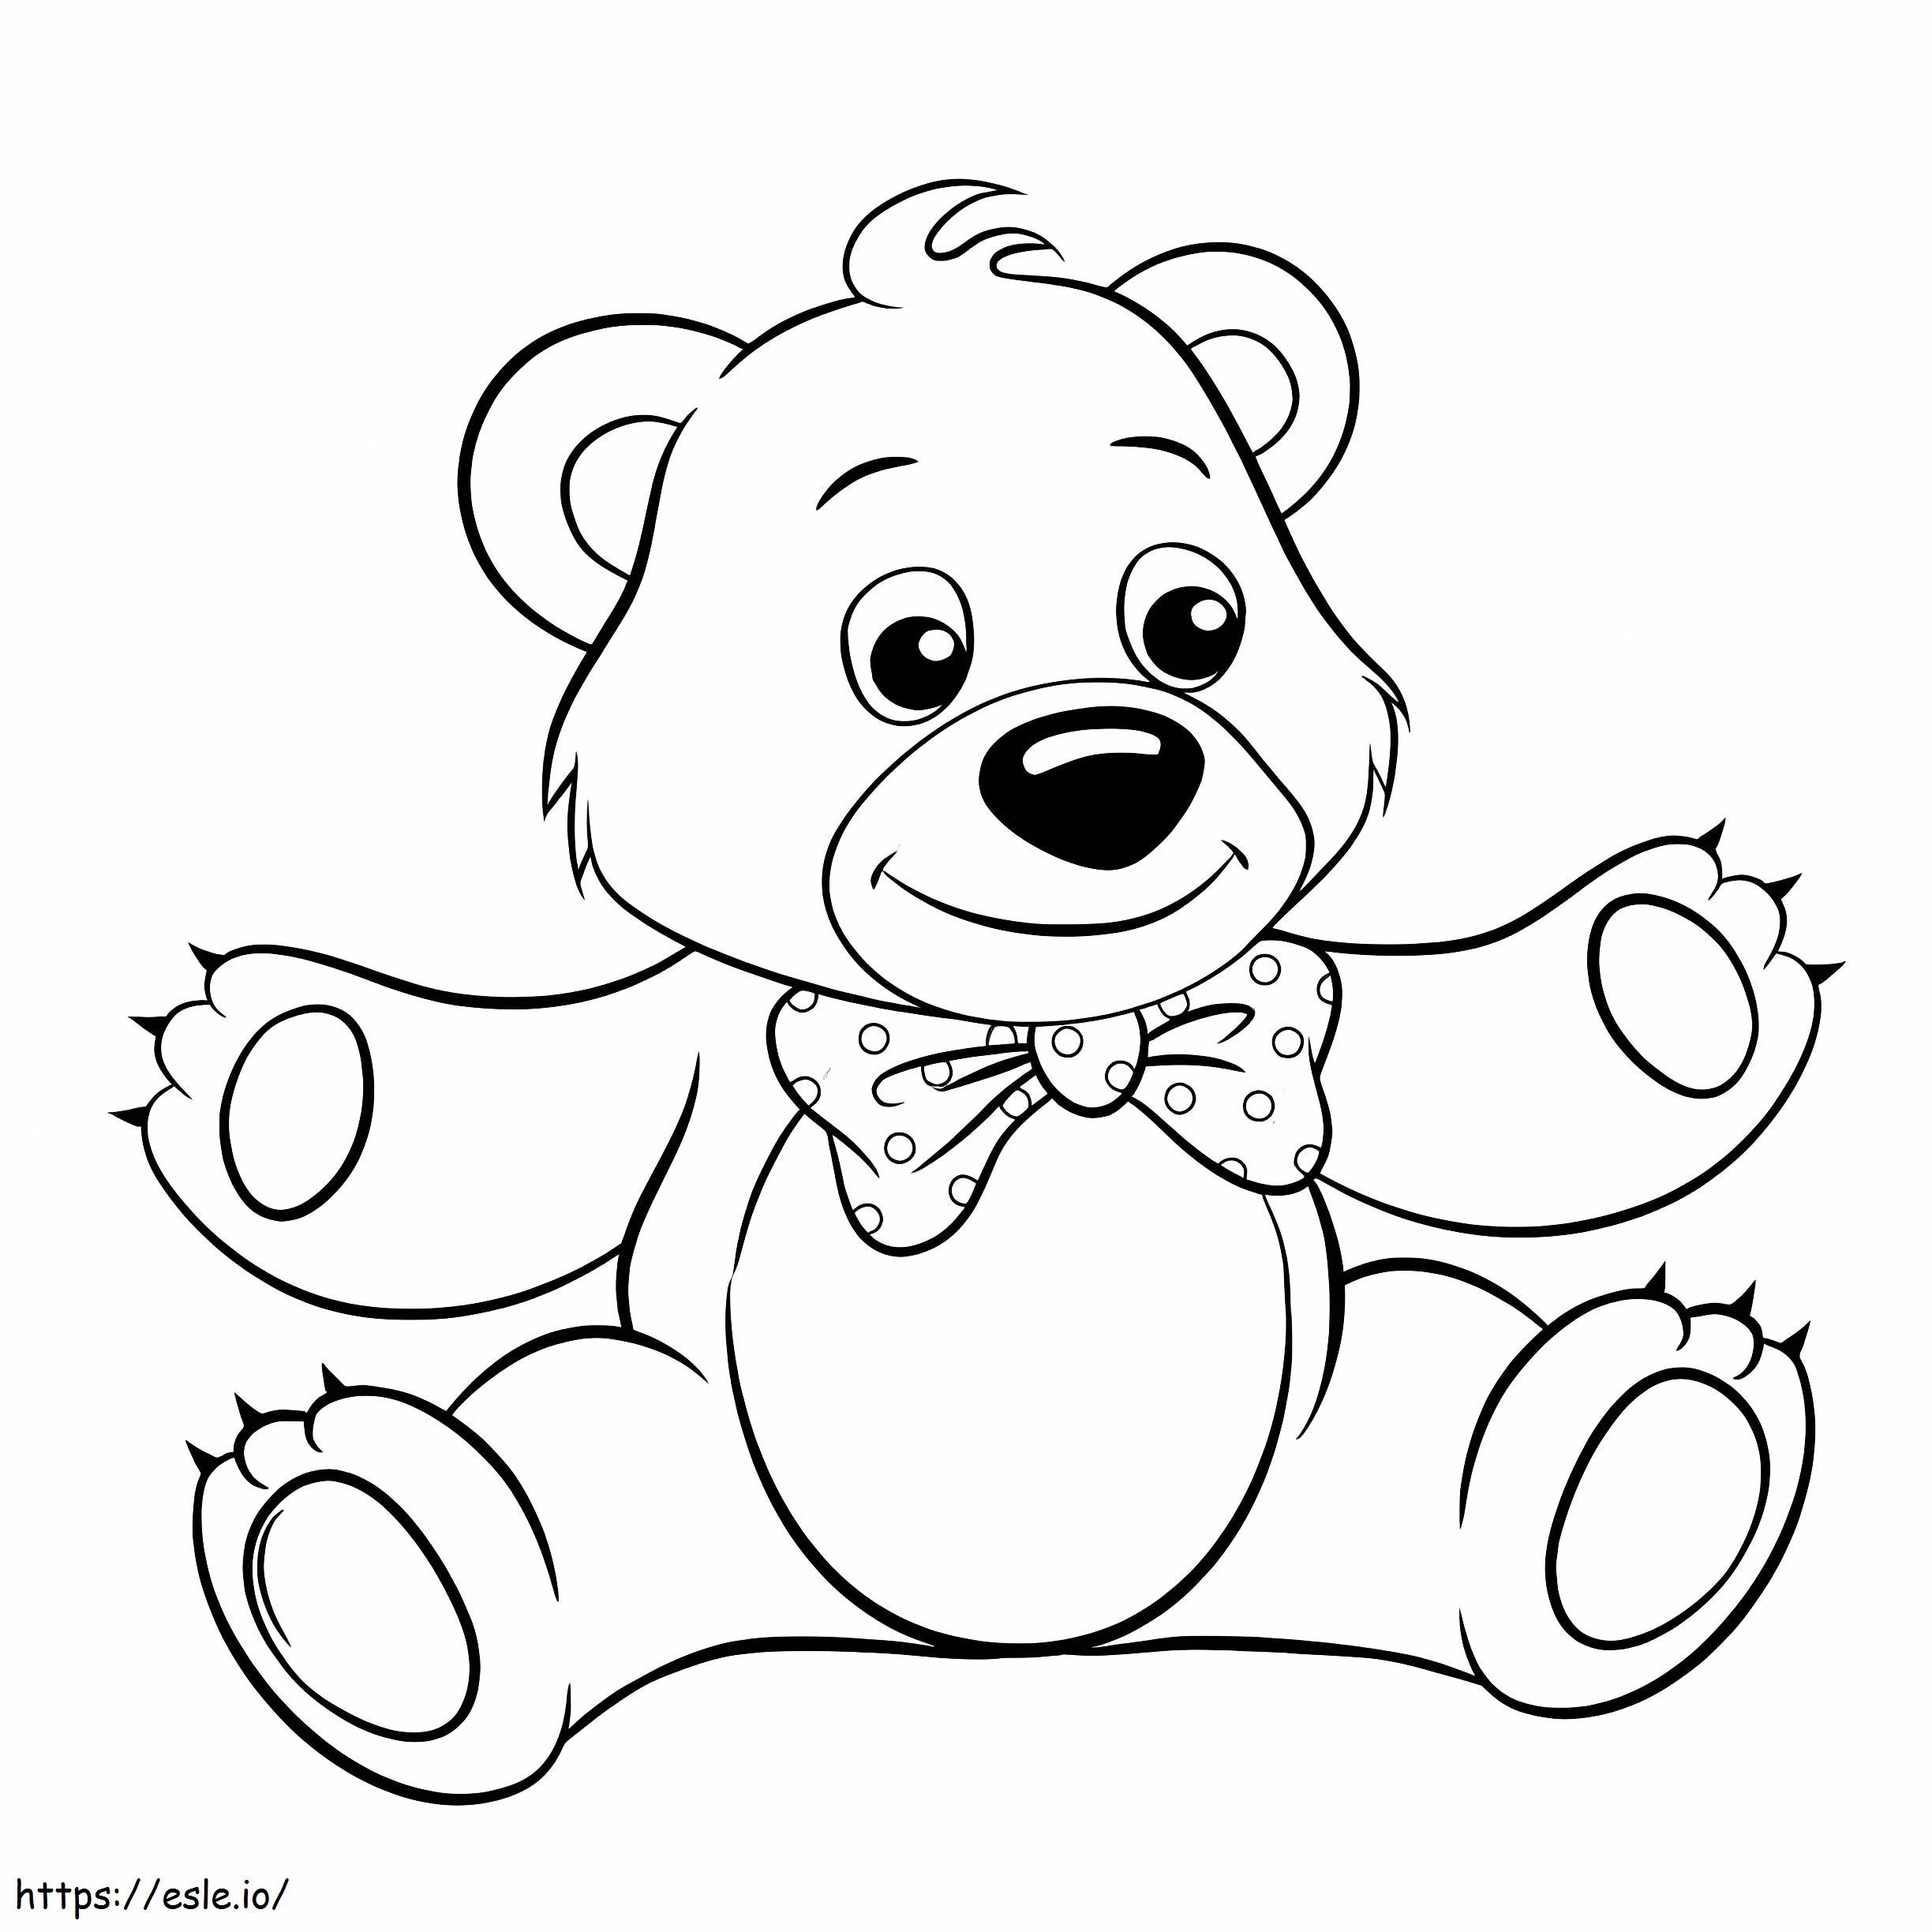 Nice Teddy Bear coloring page